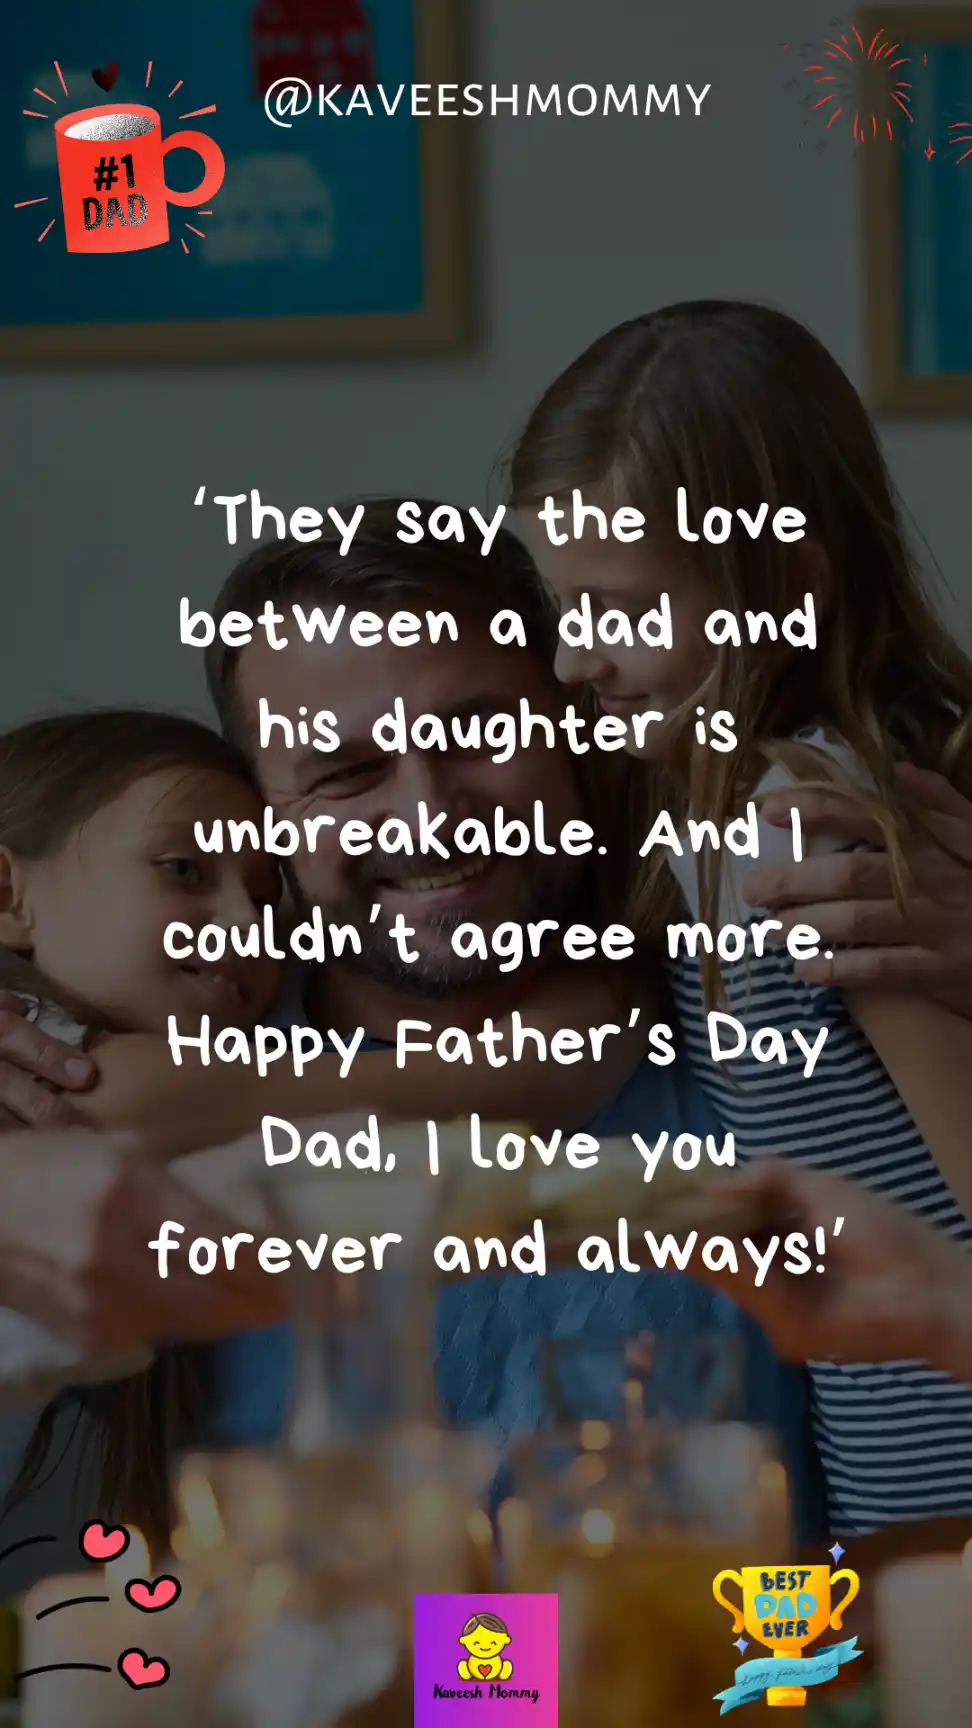 fatherhood quotes daughter-They say the love between a dad and his daughter is unbreakable. And I couldn’t agree more. Happy Father’s Day Dad, I love you forever and always!’